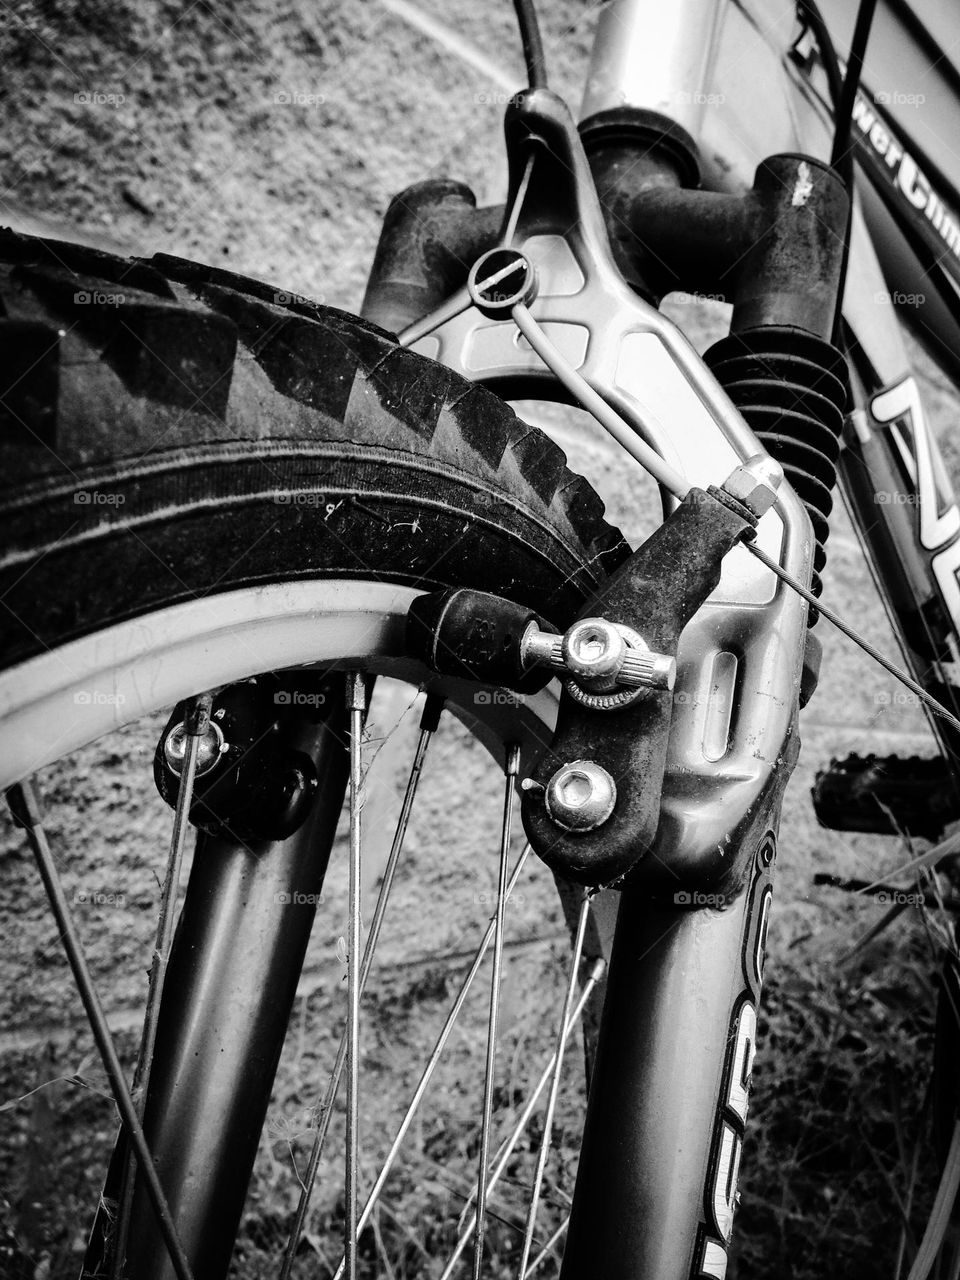 Black and white close up bicycle brakes and tire